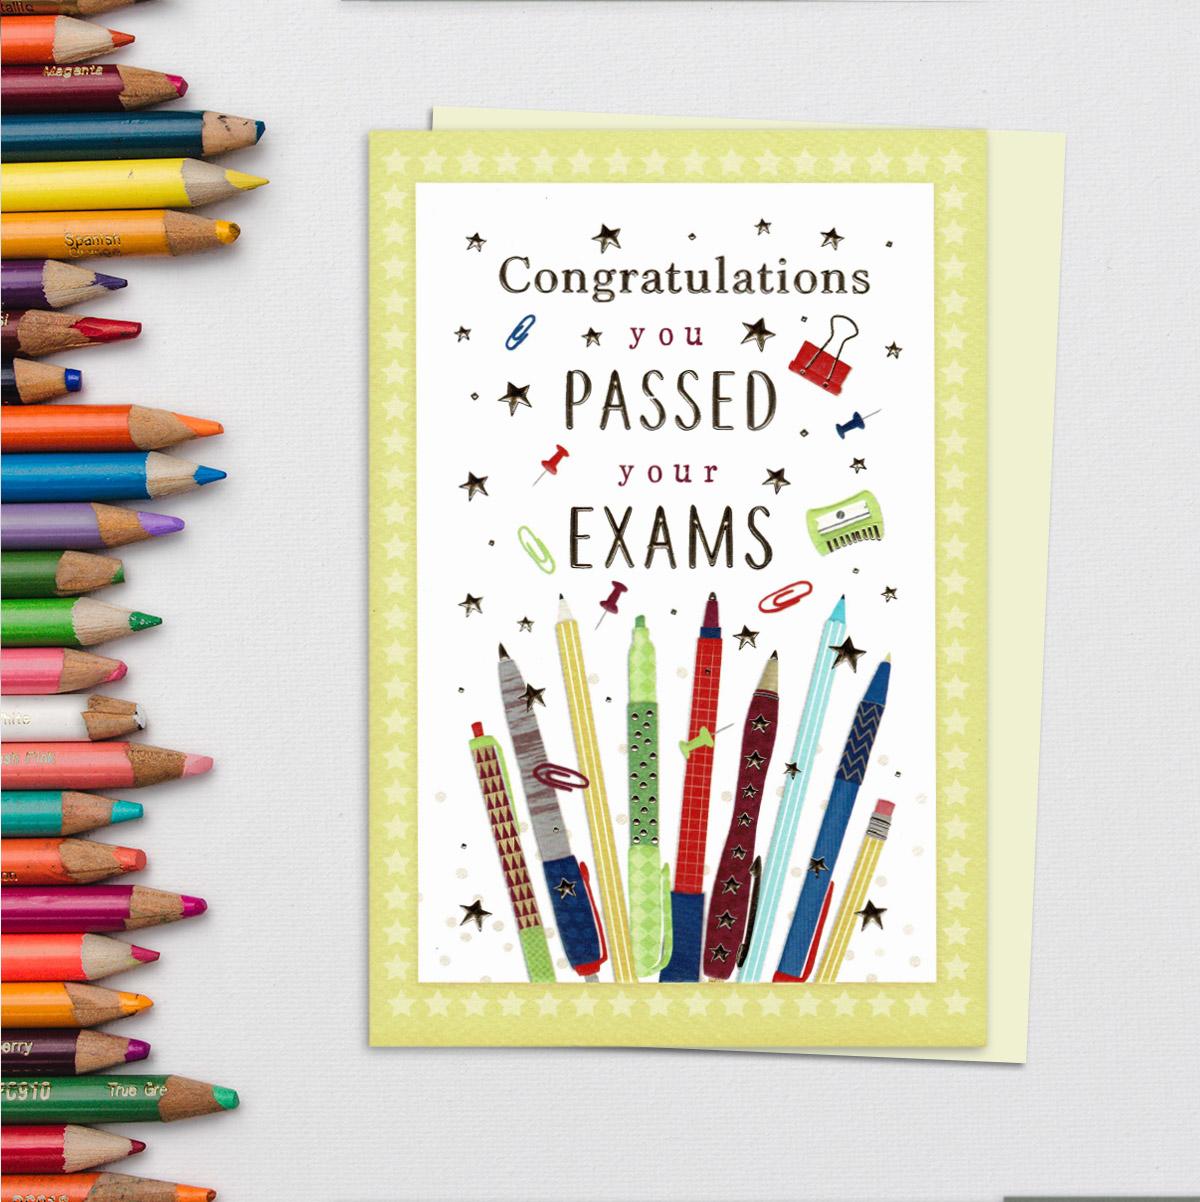 congratulations images for passing exams